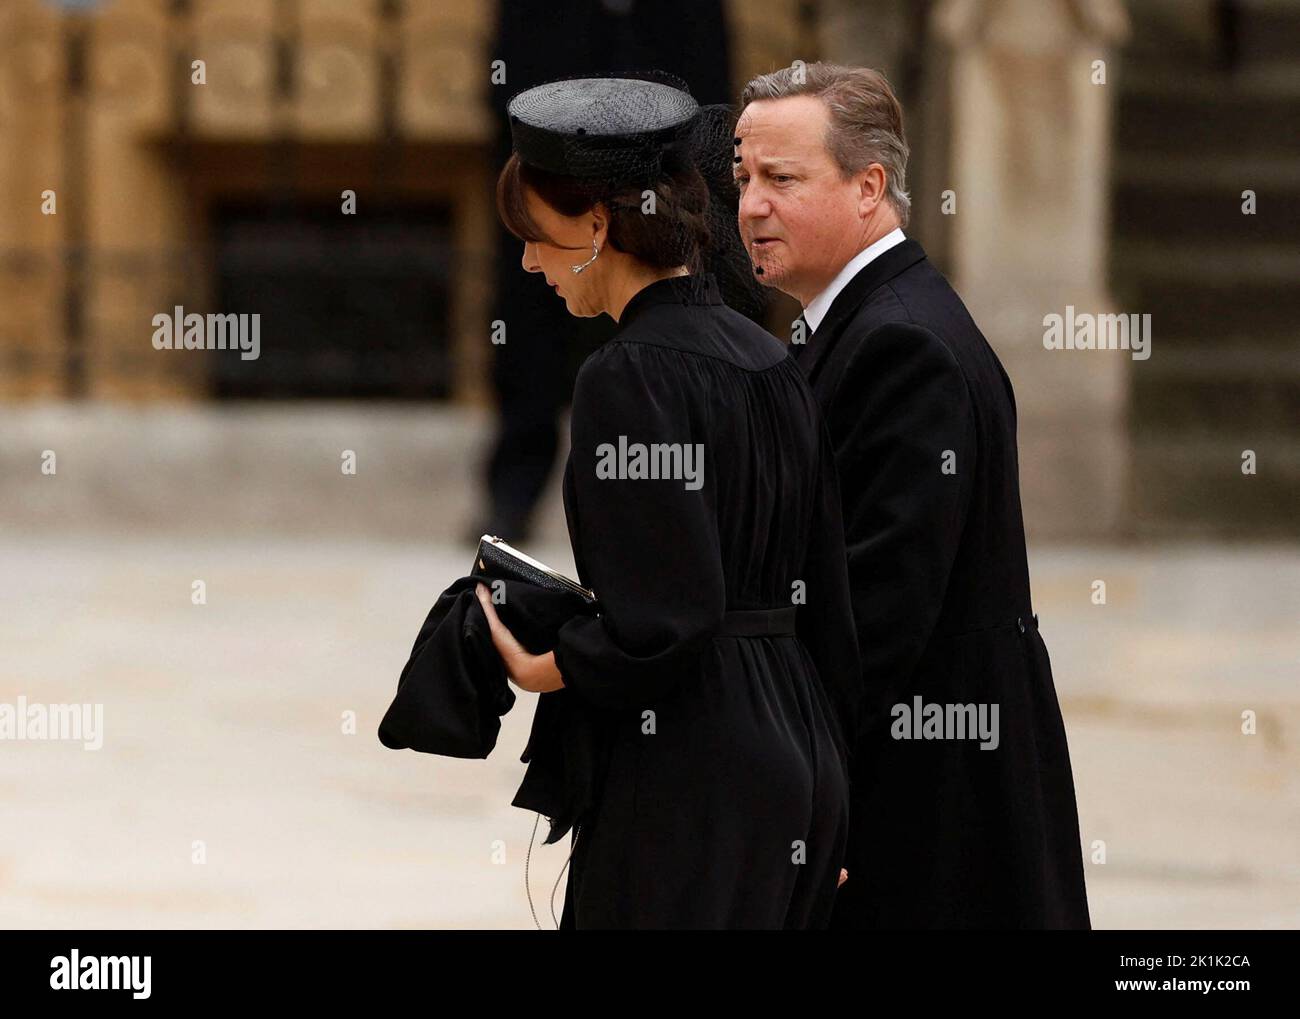 Former British Prime Minister David Cameron and his wife Samantha Cameron arrive at Westminster Abbey, on the day of the state funeral and burial of Britain's Queen Elizabeth, in London, Britain, September 19, 2022  REUTERS/John Sibley Stock Photo